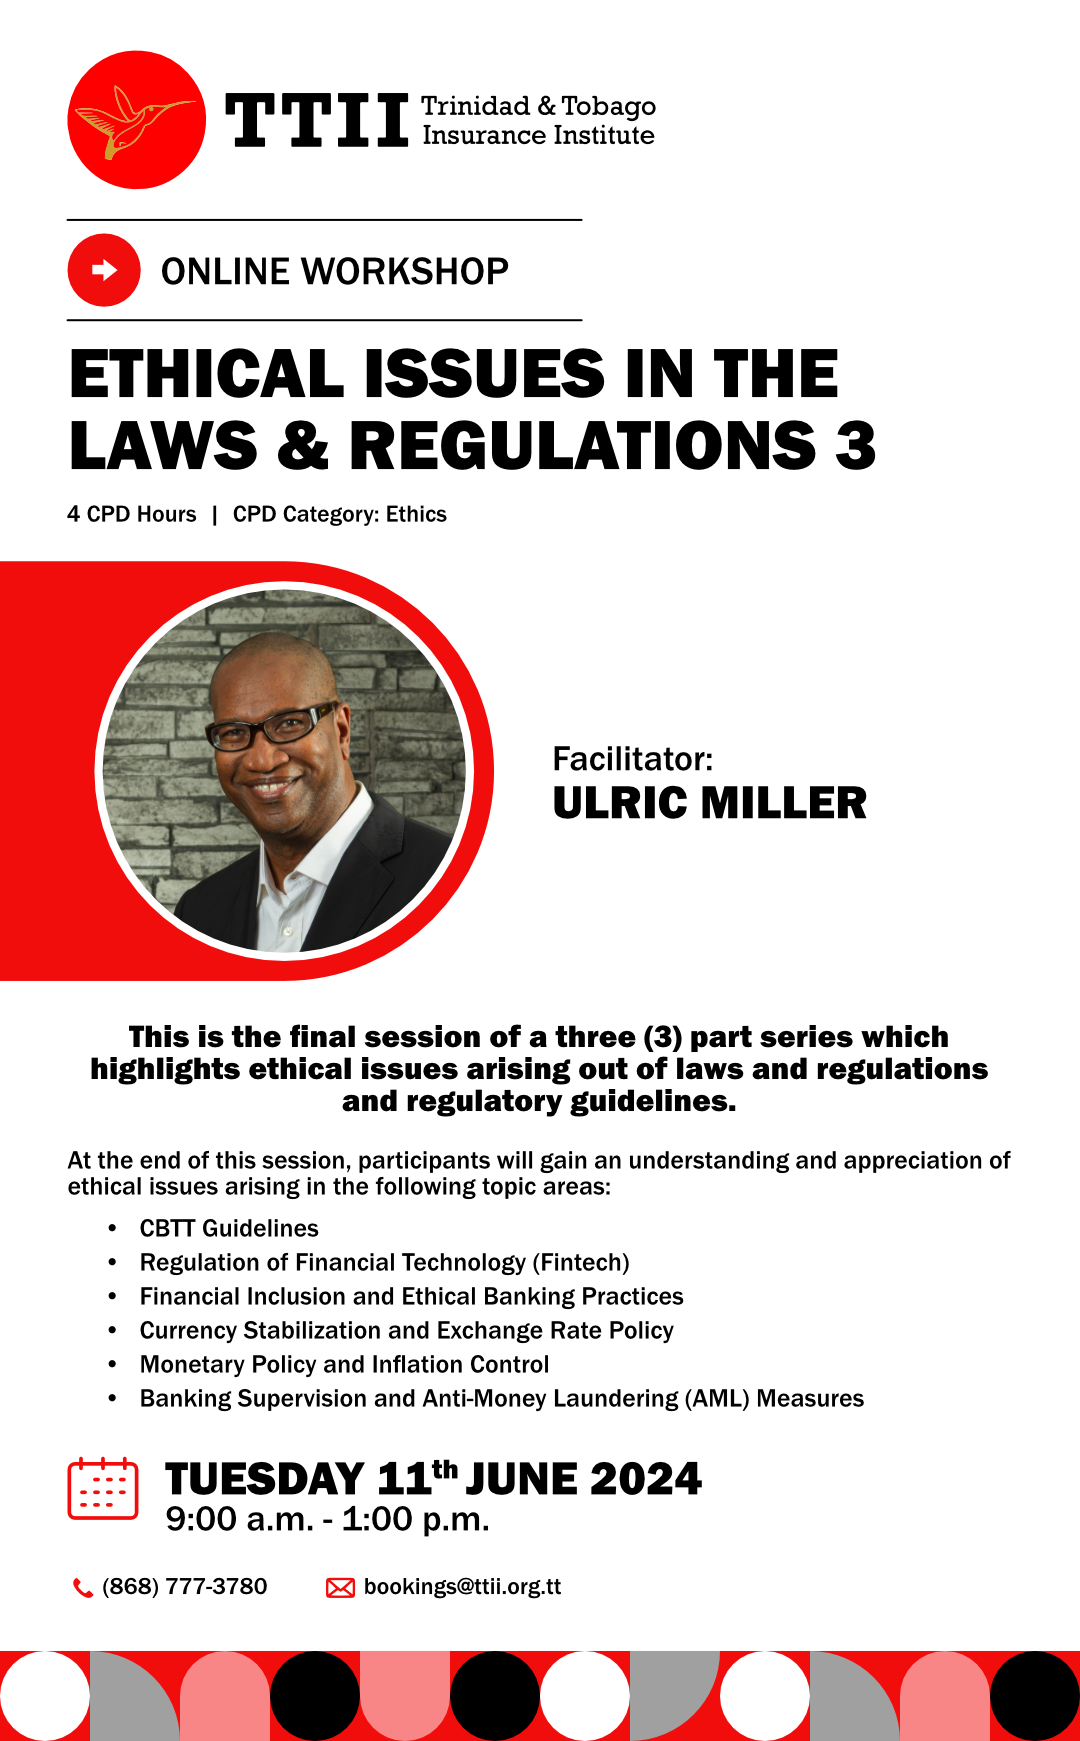 Ethical Issues in the Laws & Regulations 3